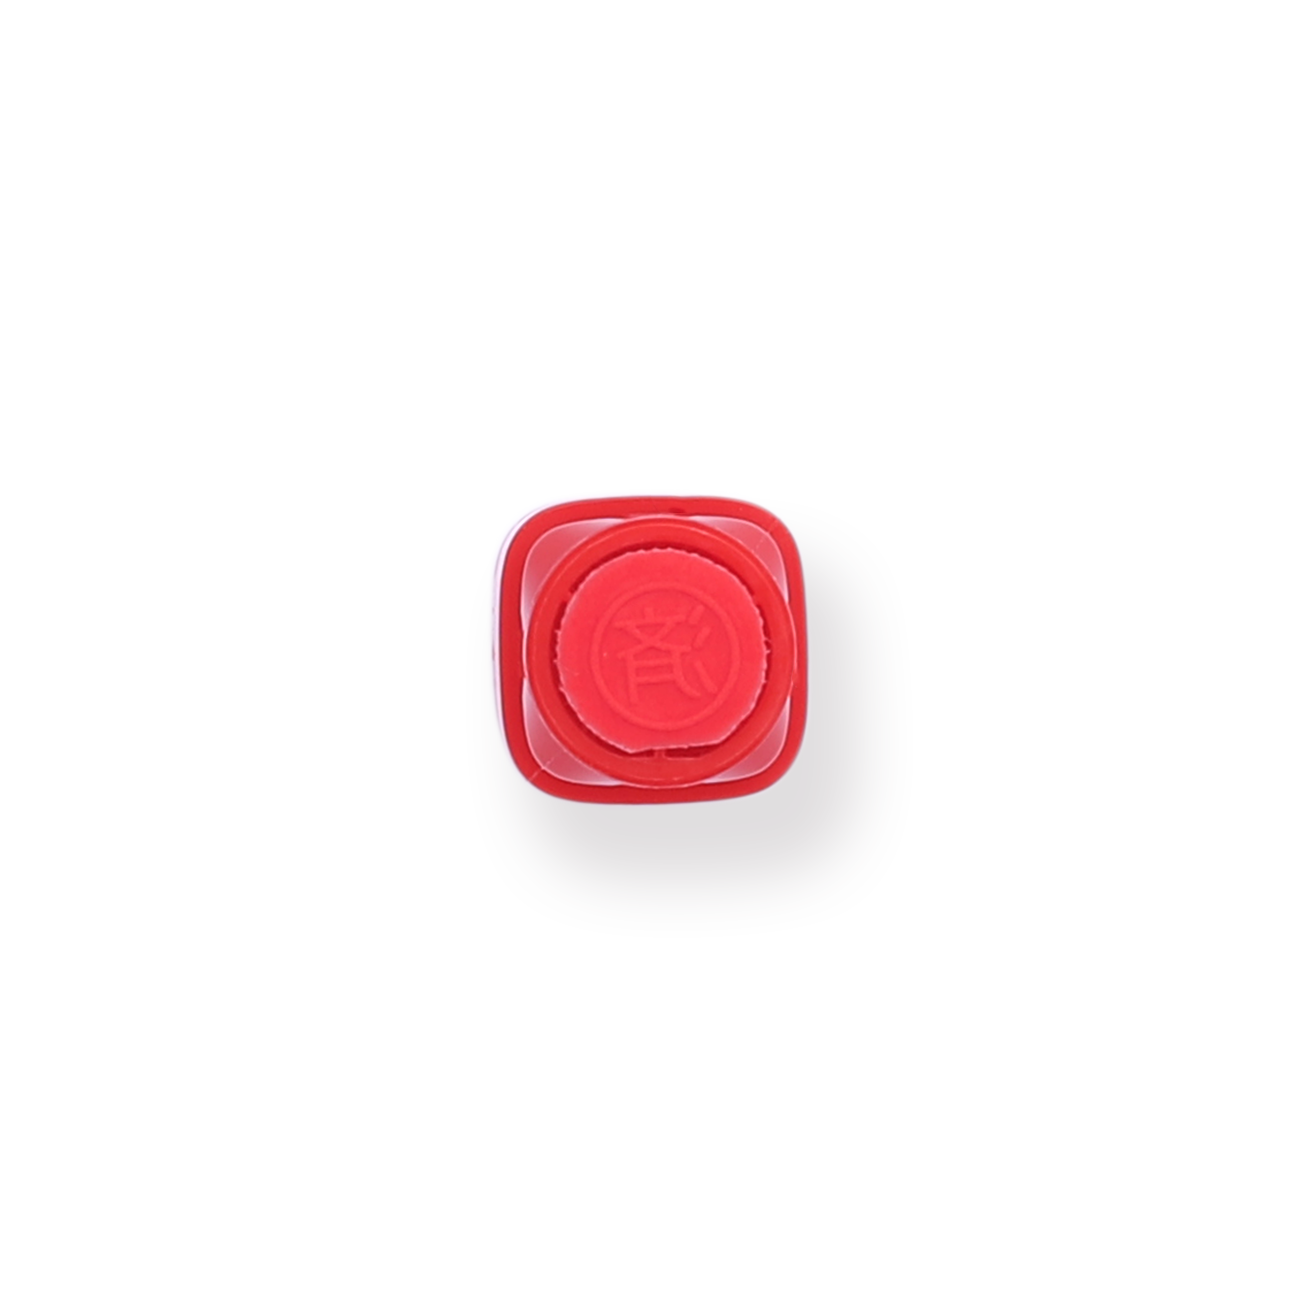 Pilot FriXion Stamp - Red - Completed - Stationery Pal